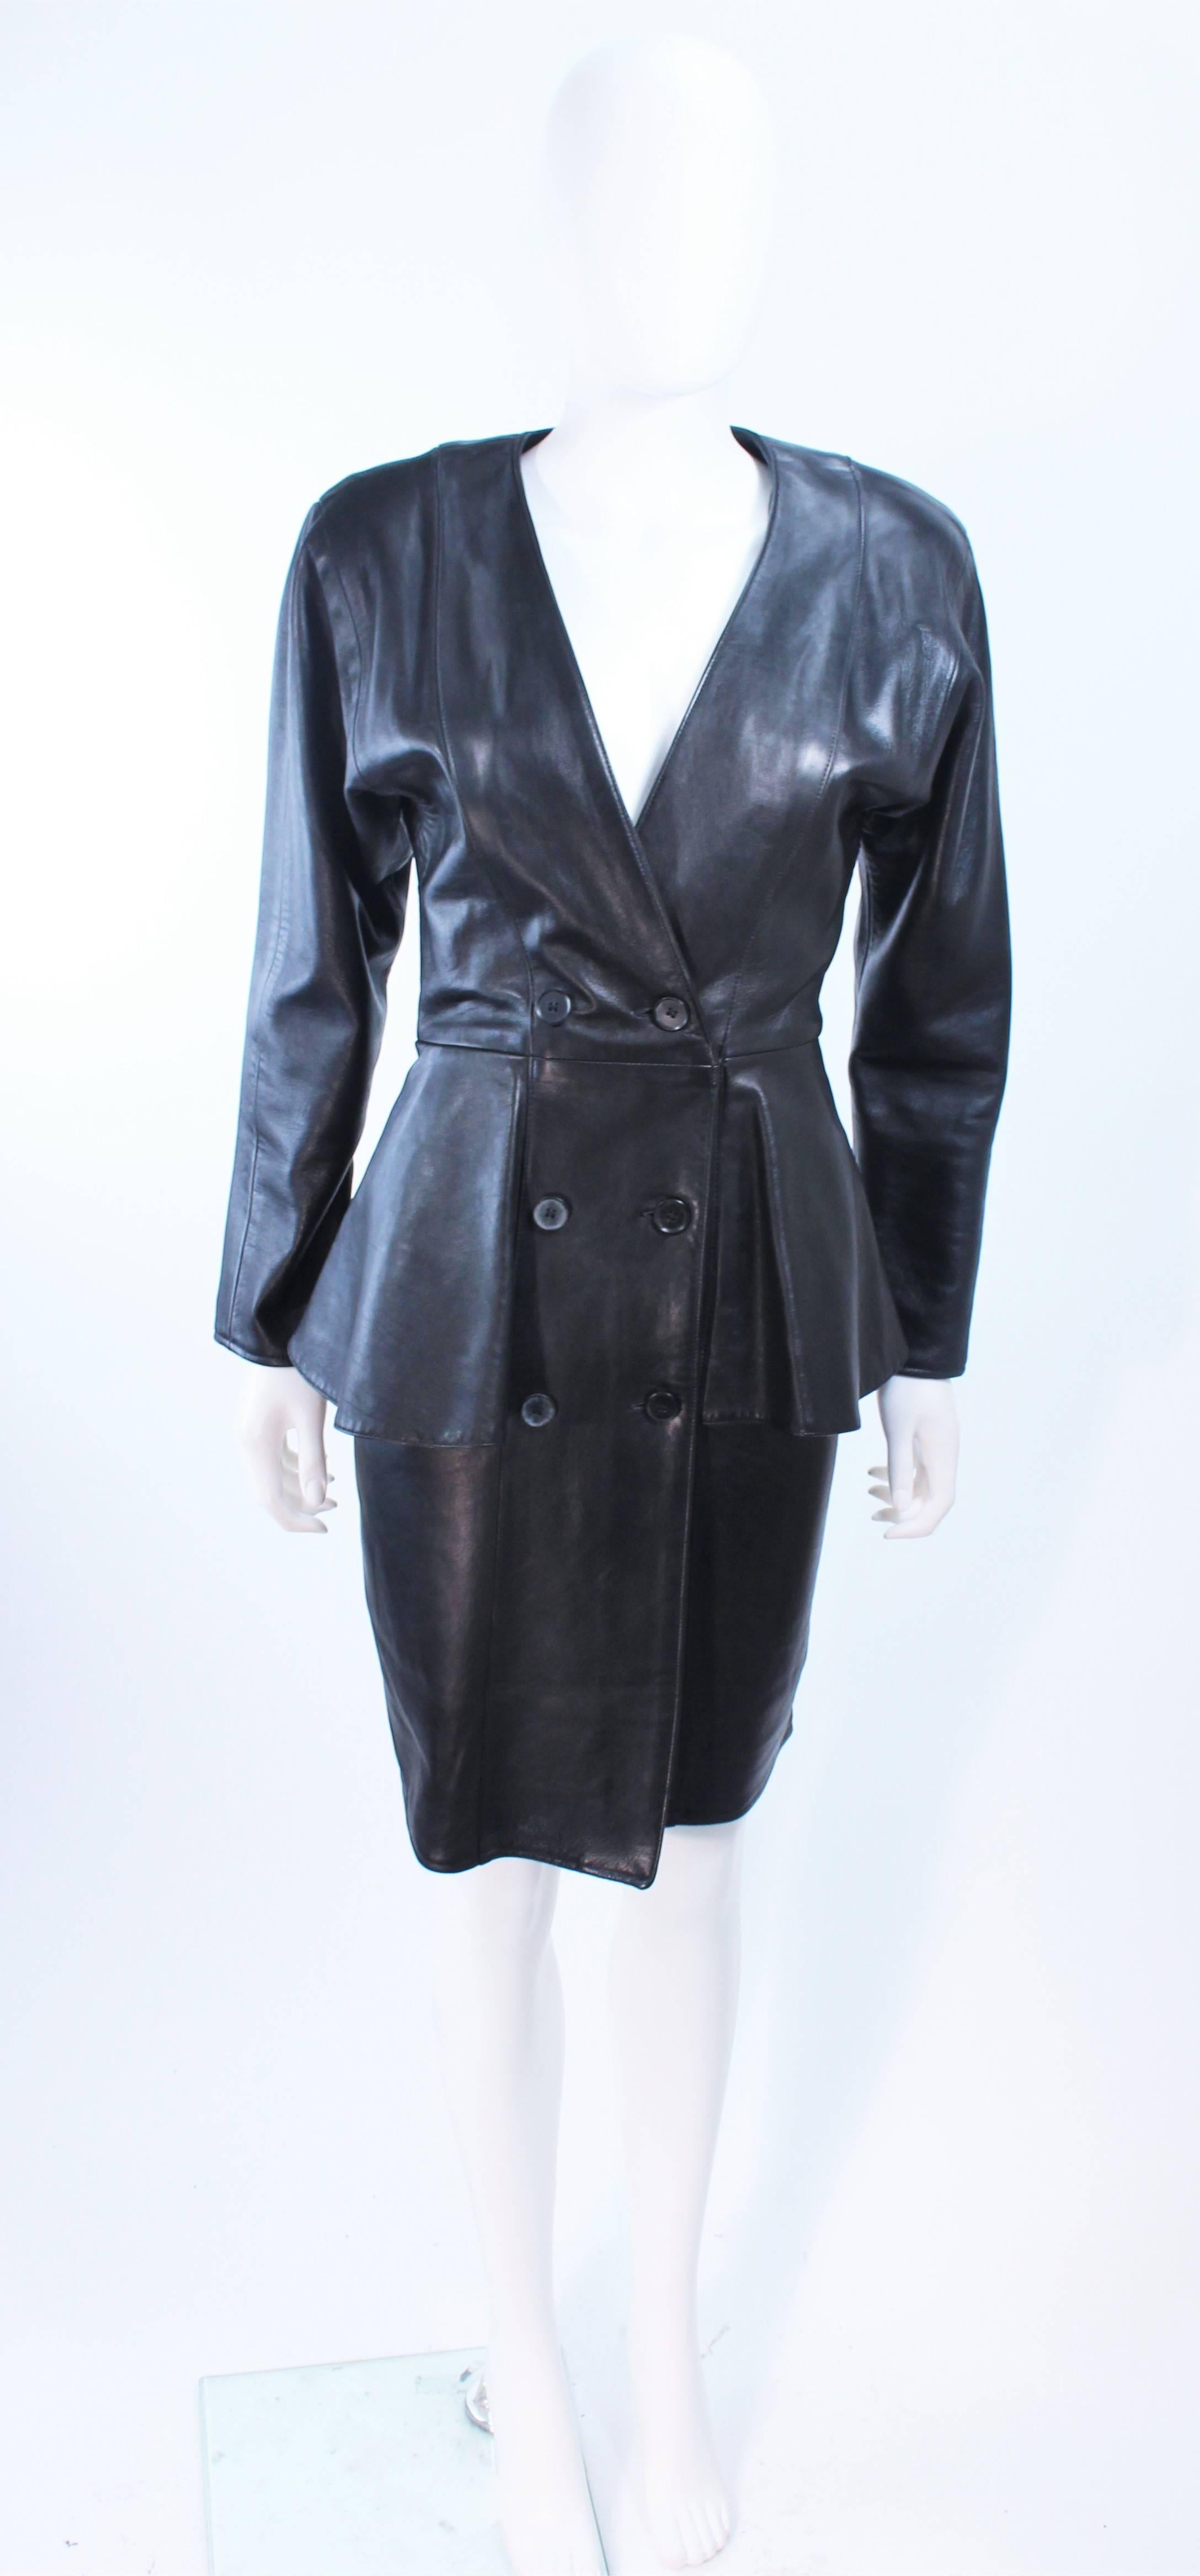 This Vakko design is composed of a phenomenal leather. The classic style with a flair features center front button closures and a peplum waist flare. In excellent vintage condition.

**Please cross-reference measurements for personal accuracy.